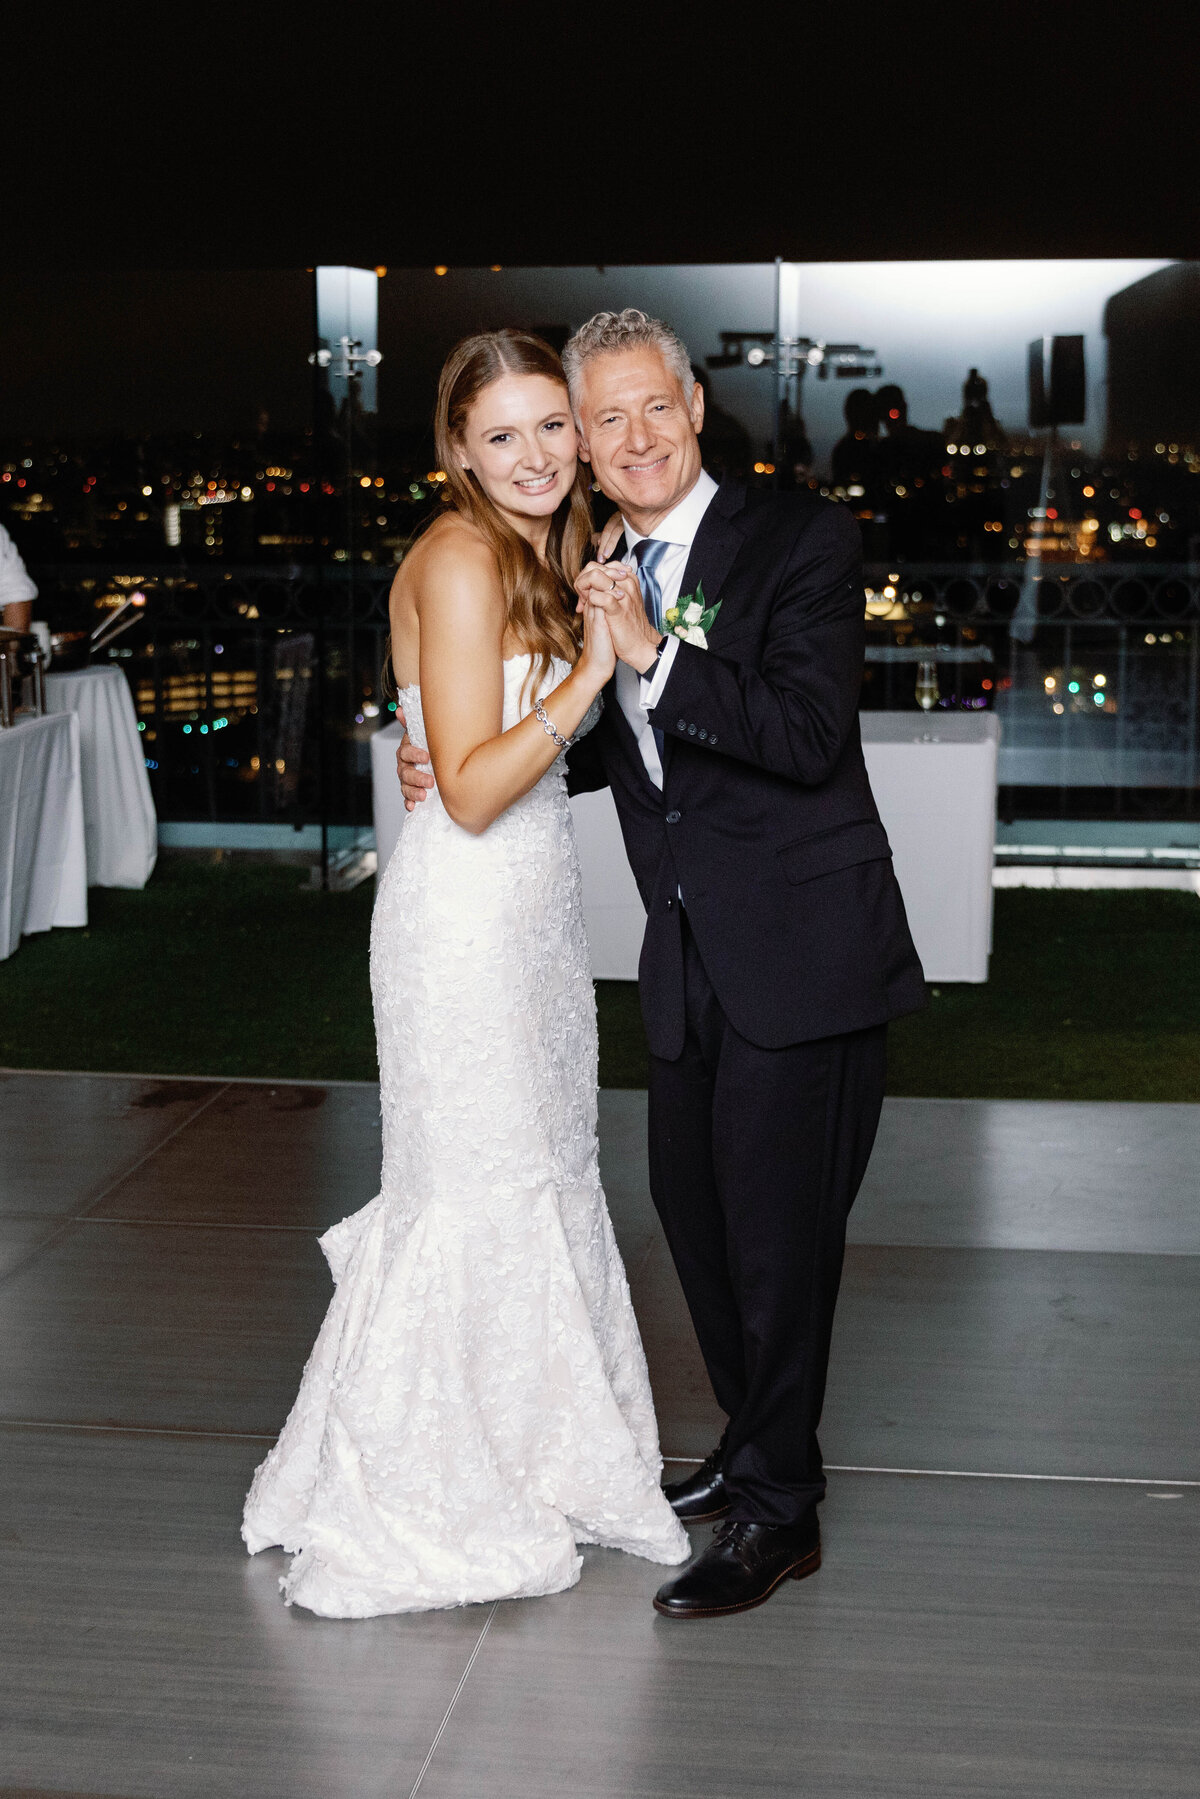 father-daughter-wedding-dance-at-the-london-west-hollywood-1